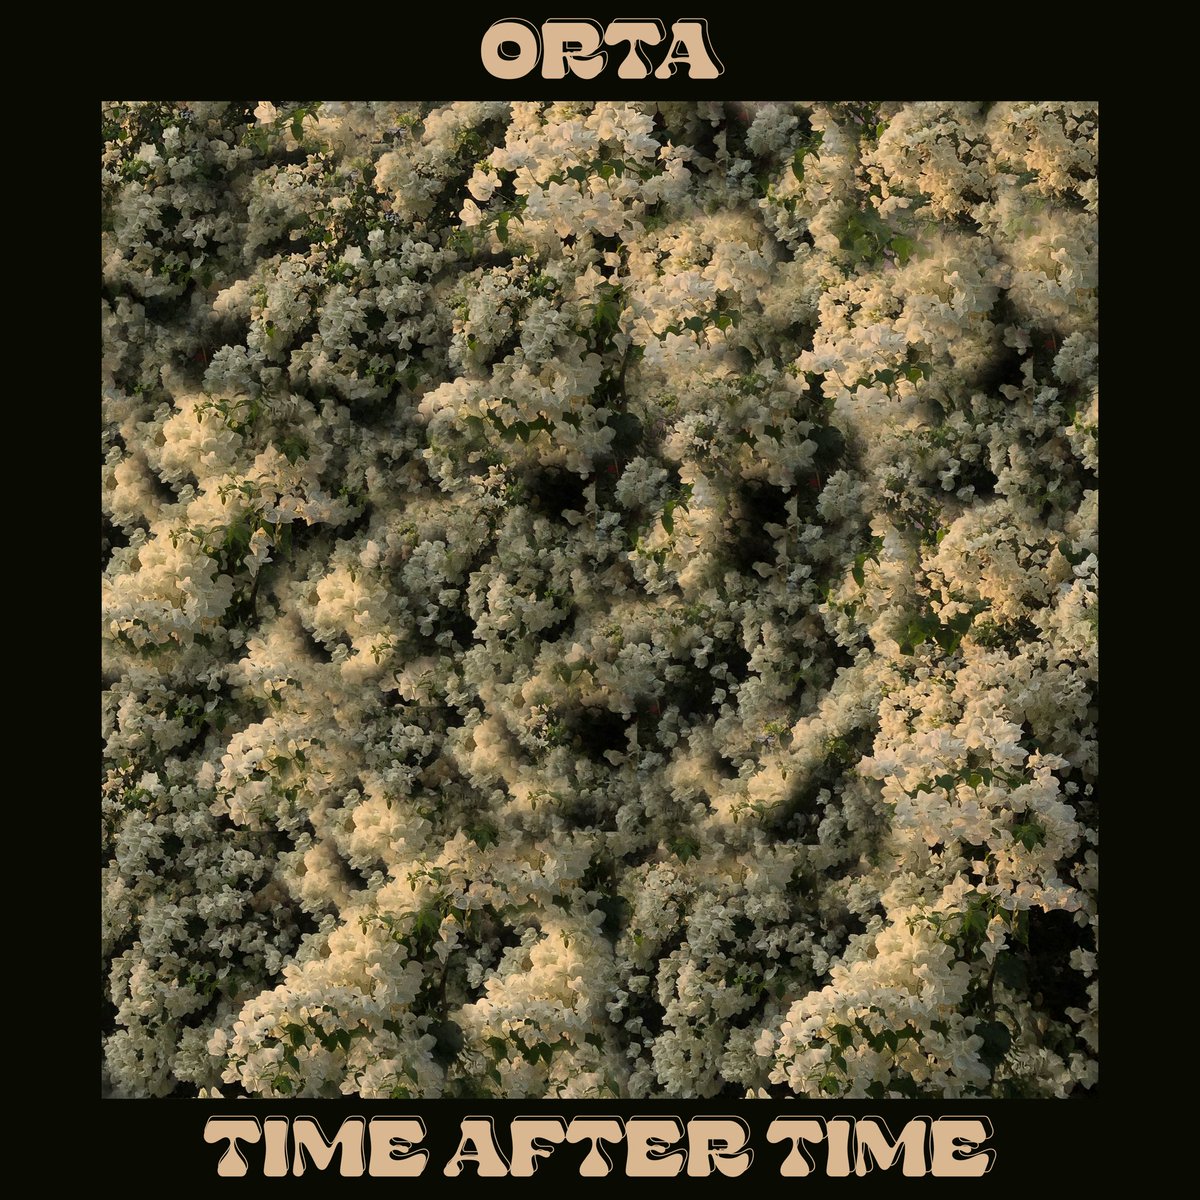 Pleased to announce my debut single ‘Time After Time’. Released April 28th. Pre-save link in bio